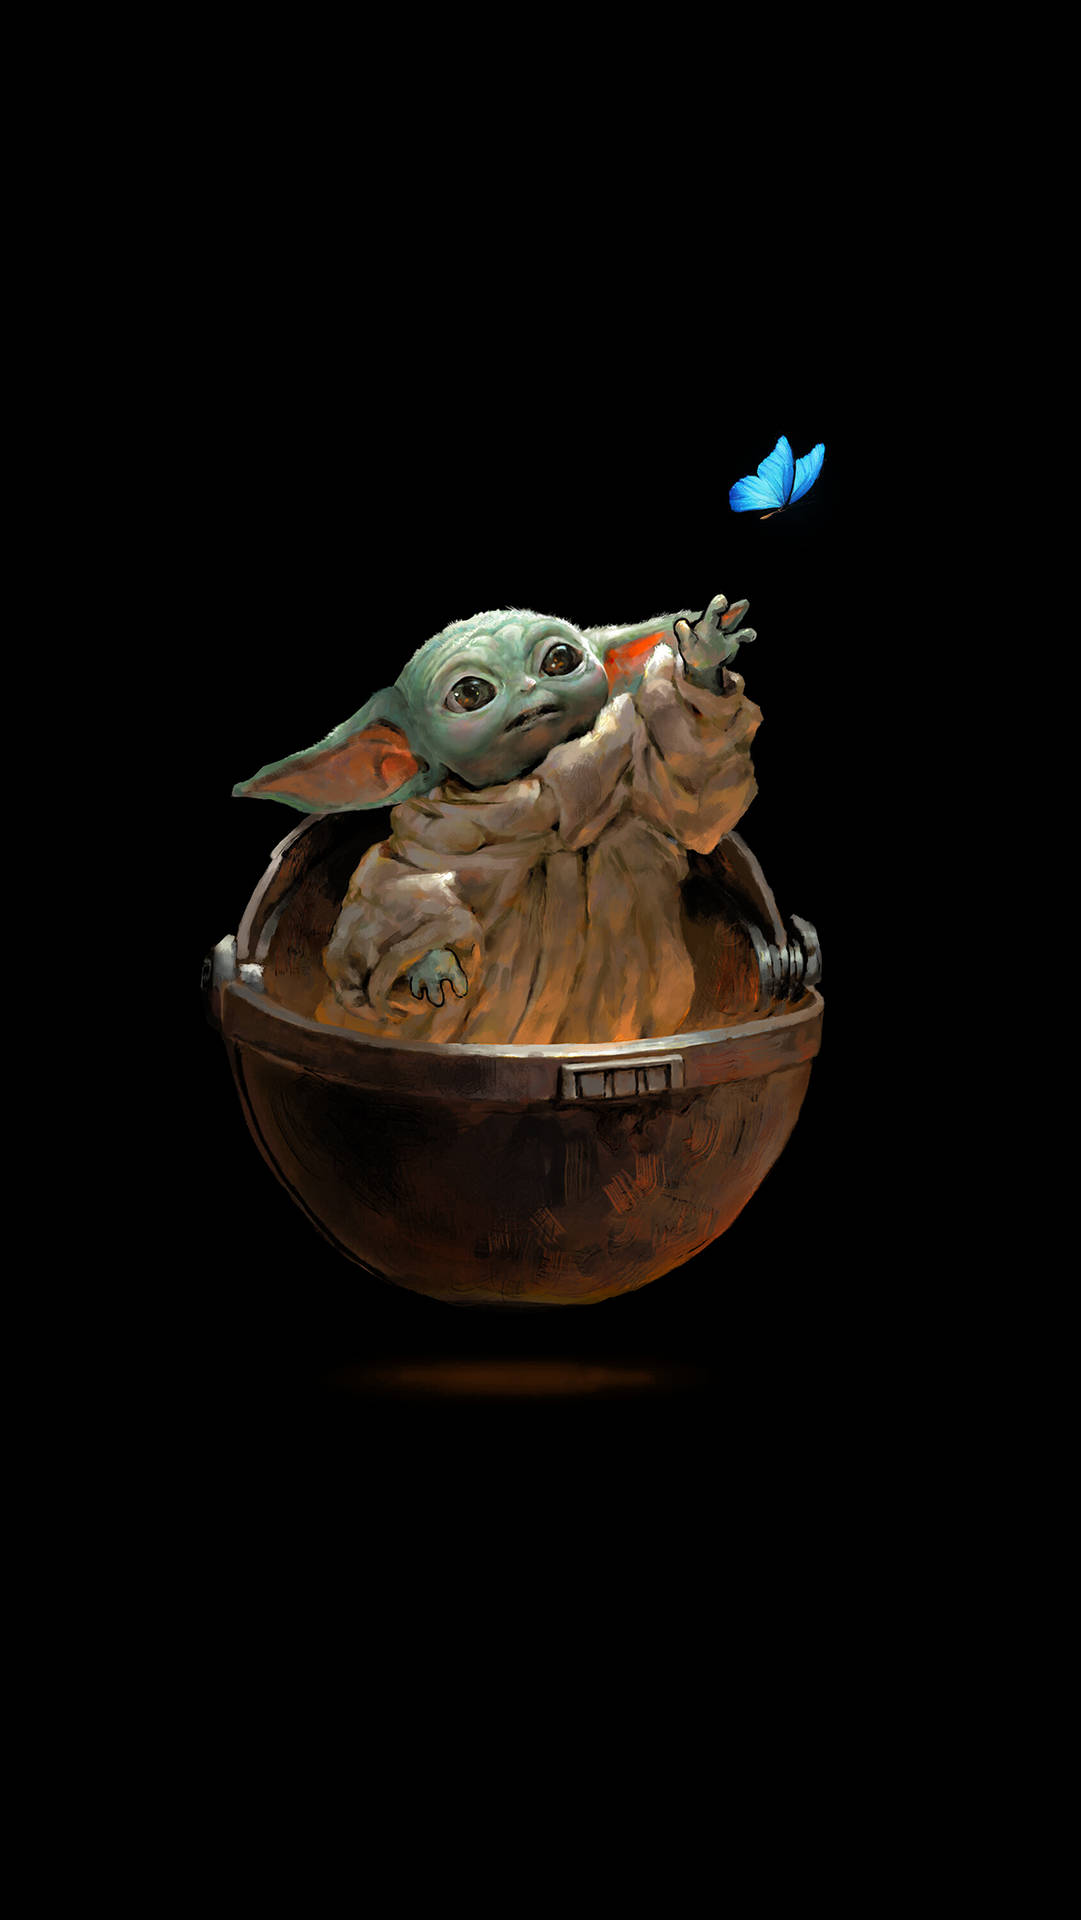 Yoda In Bowl-shaped Space Craft Wallpaper